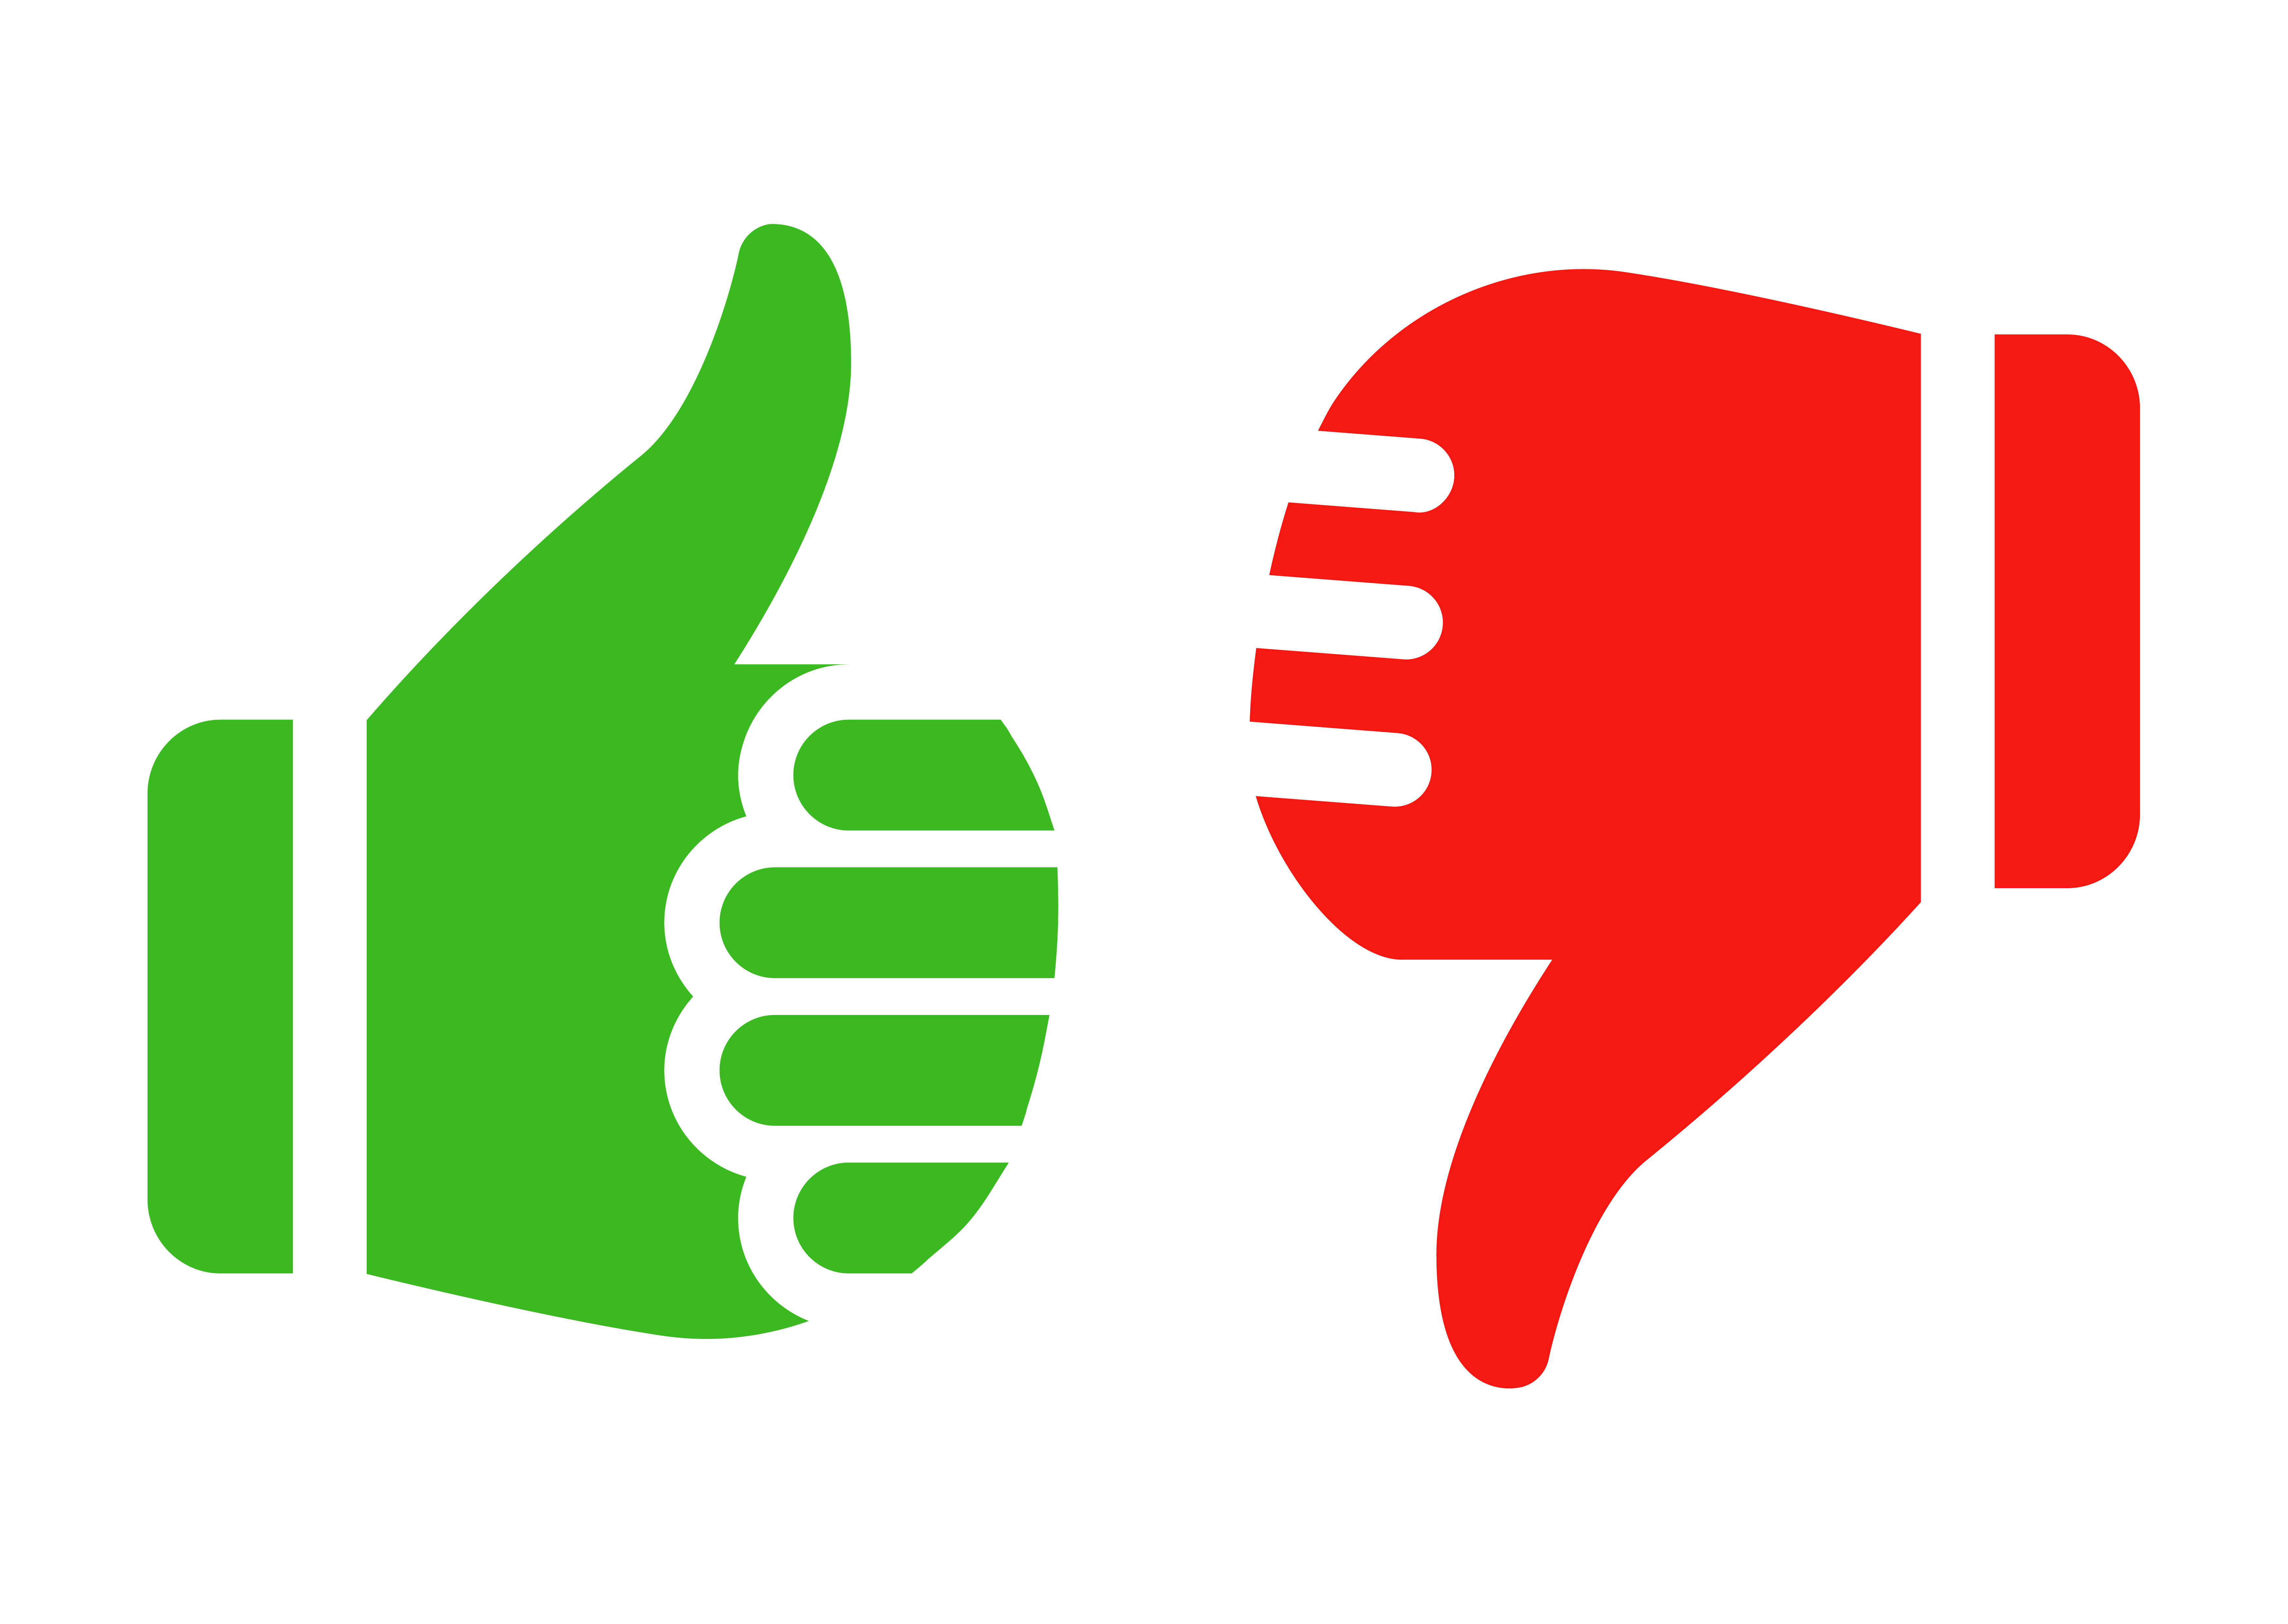 Thumbs Up And Thumbs Down - ClipArt Best